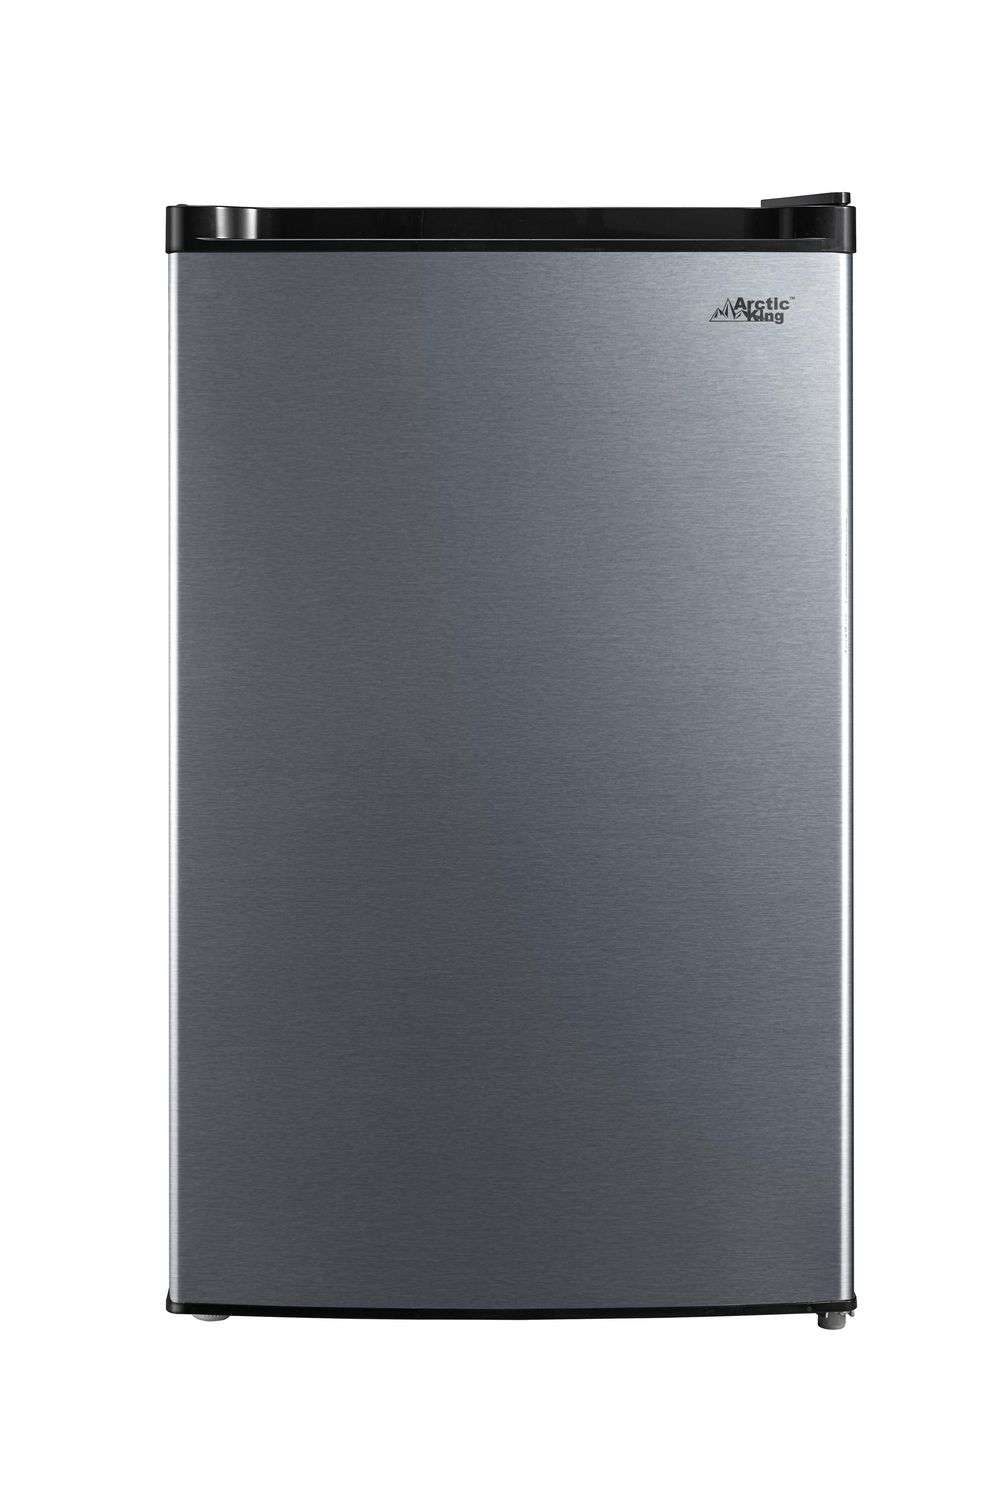 Arctic King 4.4 Cu. Ft. One-Door Compact Refrigerator, Stainless Steel, E-star